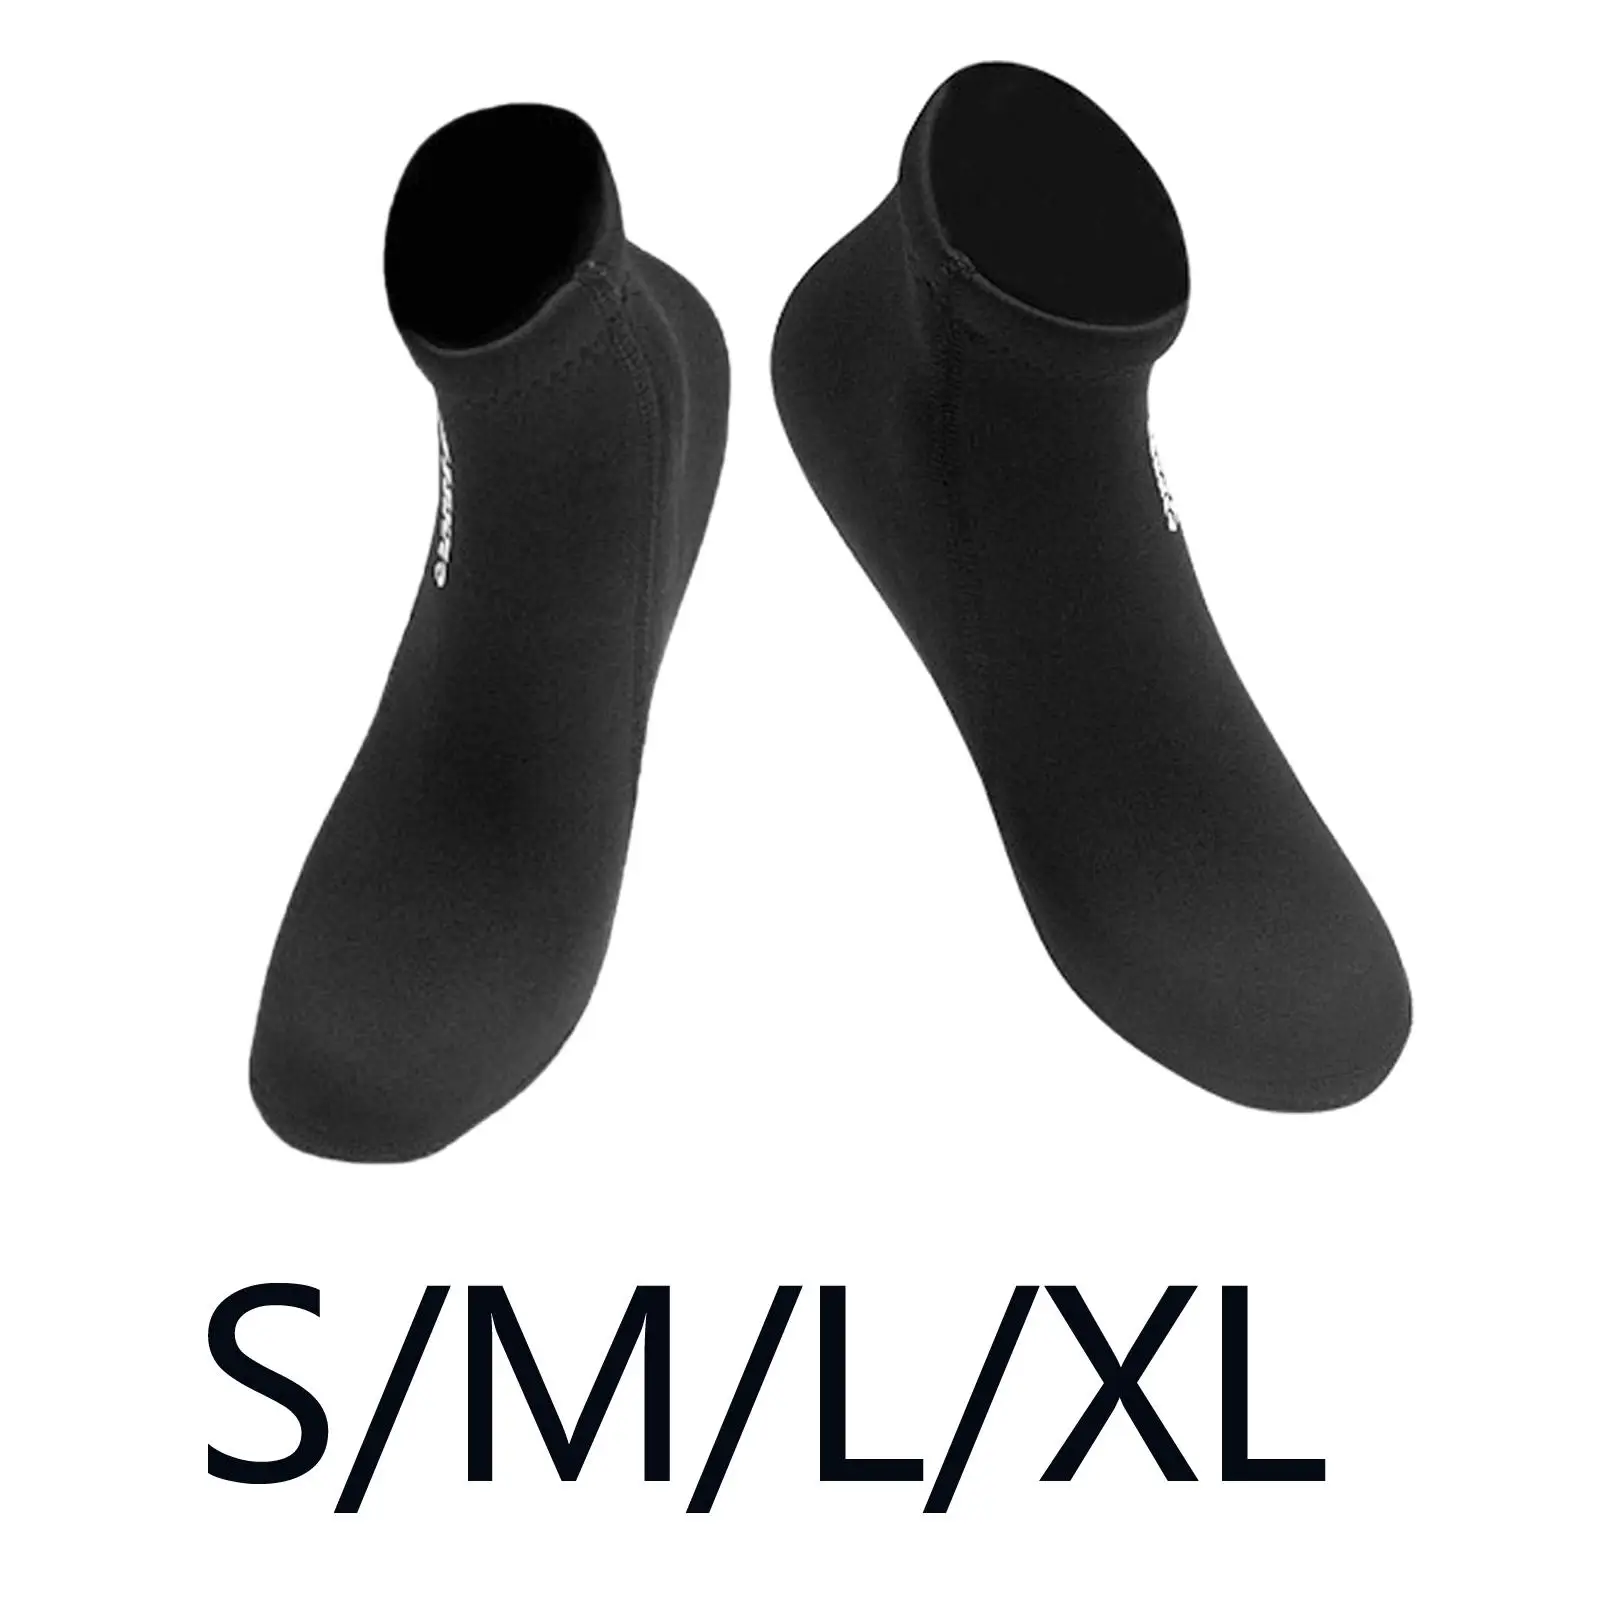 2mm Neoprene Wetsuits Socks, Diving Flexible Thermal Beach Booties Shoes, Wading